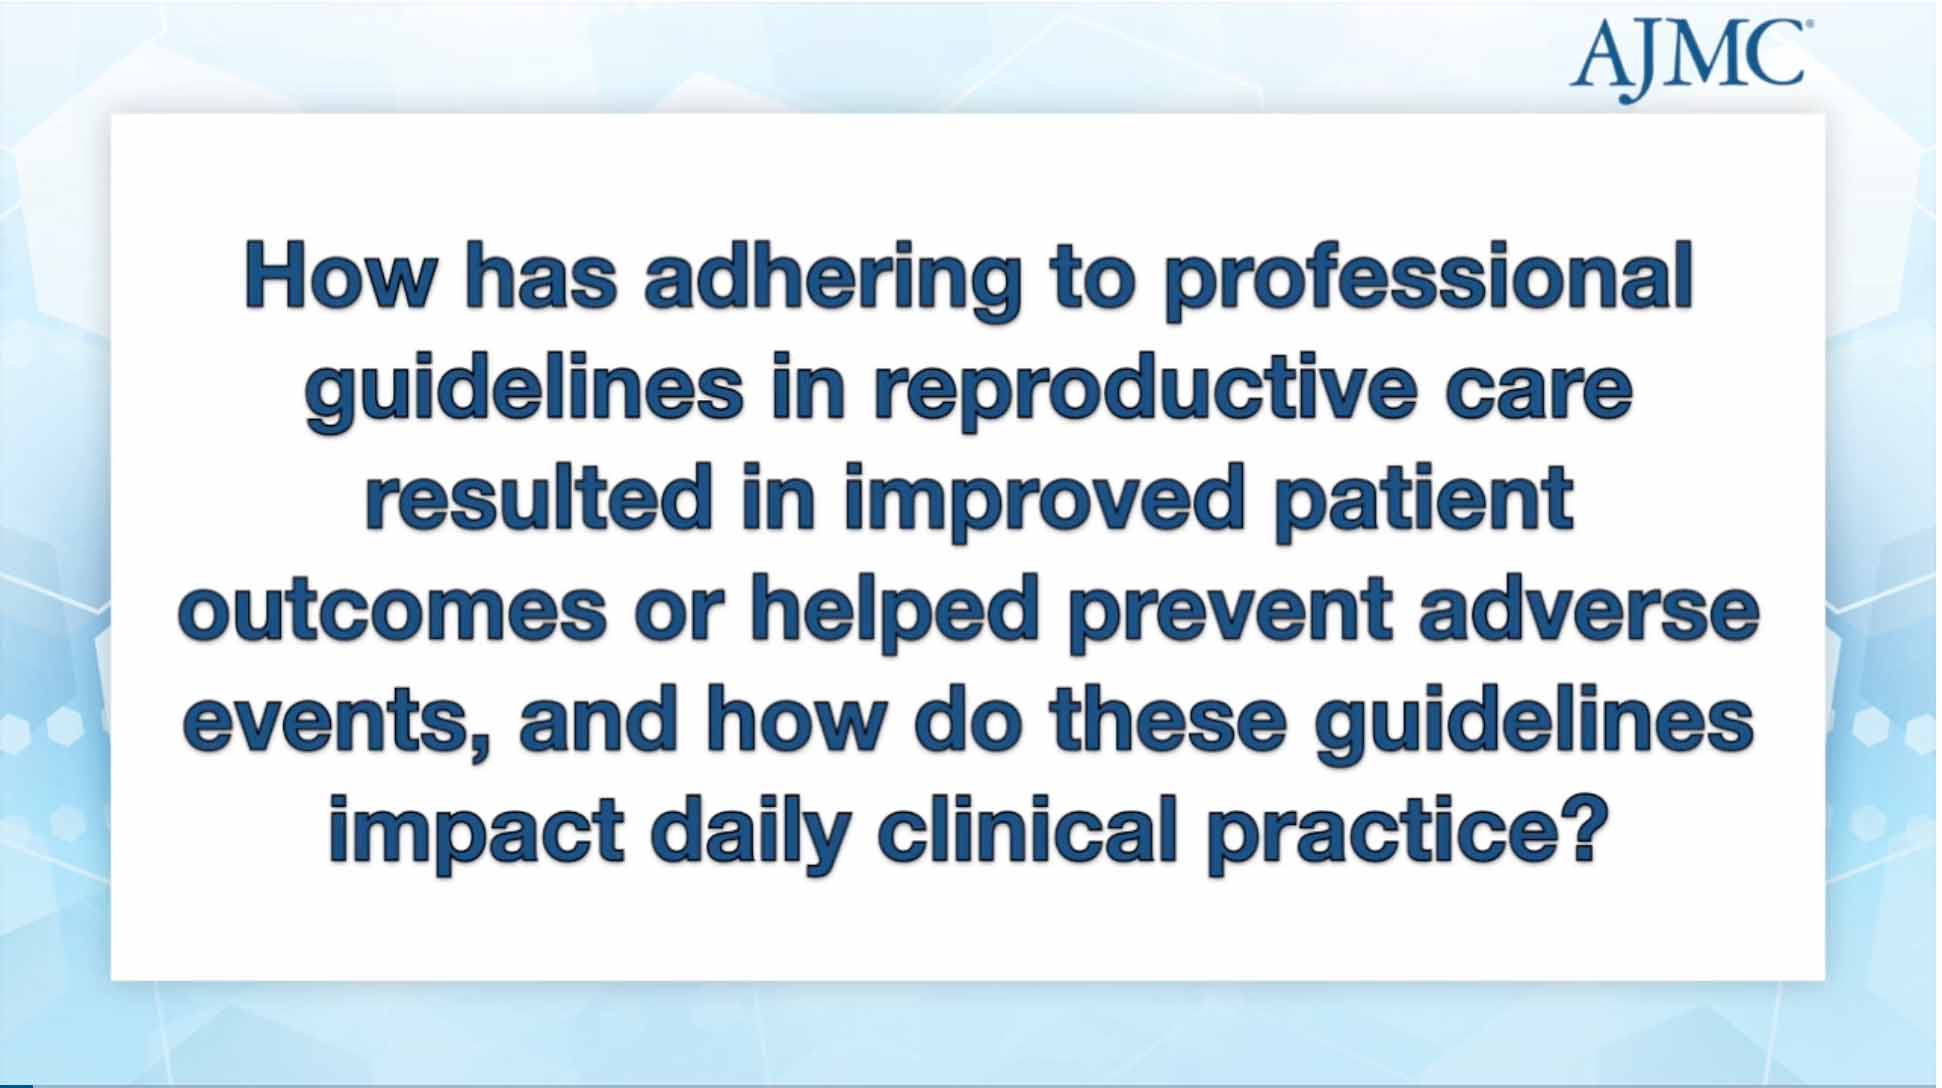 How has adhering to professional guidelines in reproductive care resulted in improved patient outcomes or helped prevent adverse events, and how do these guidelines impact daily clinical practice?